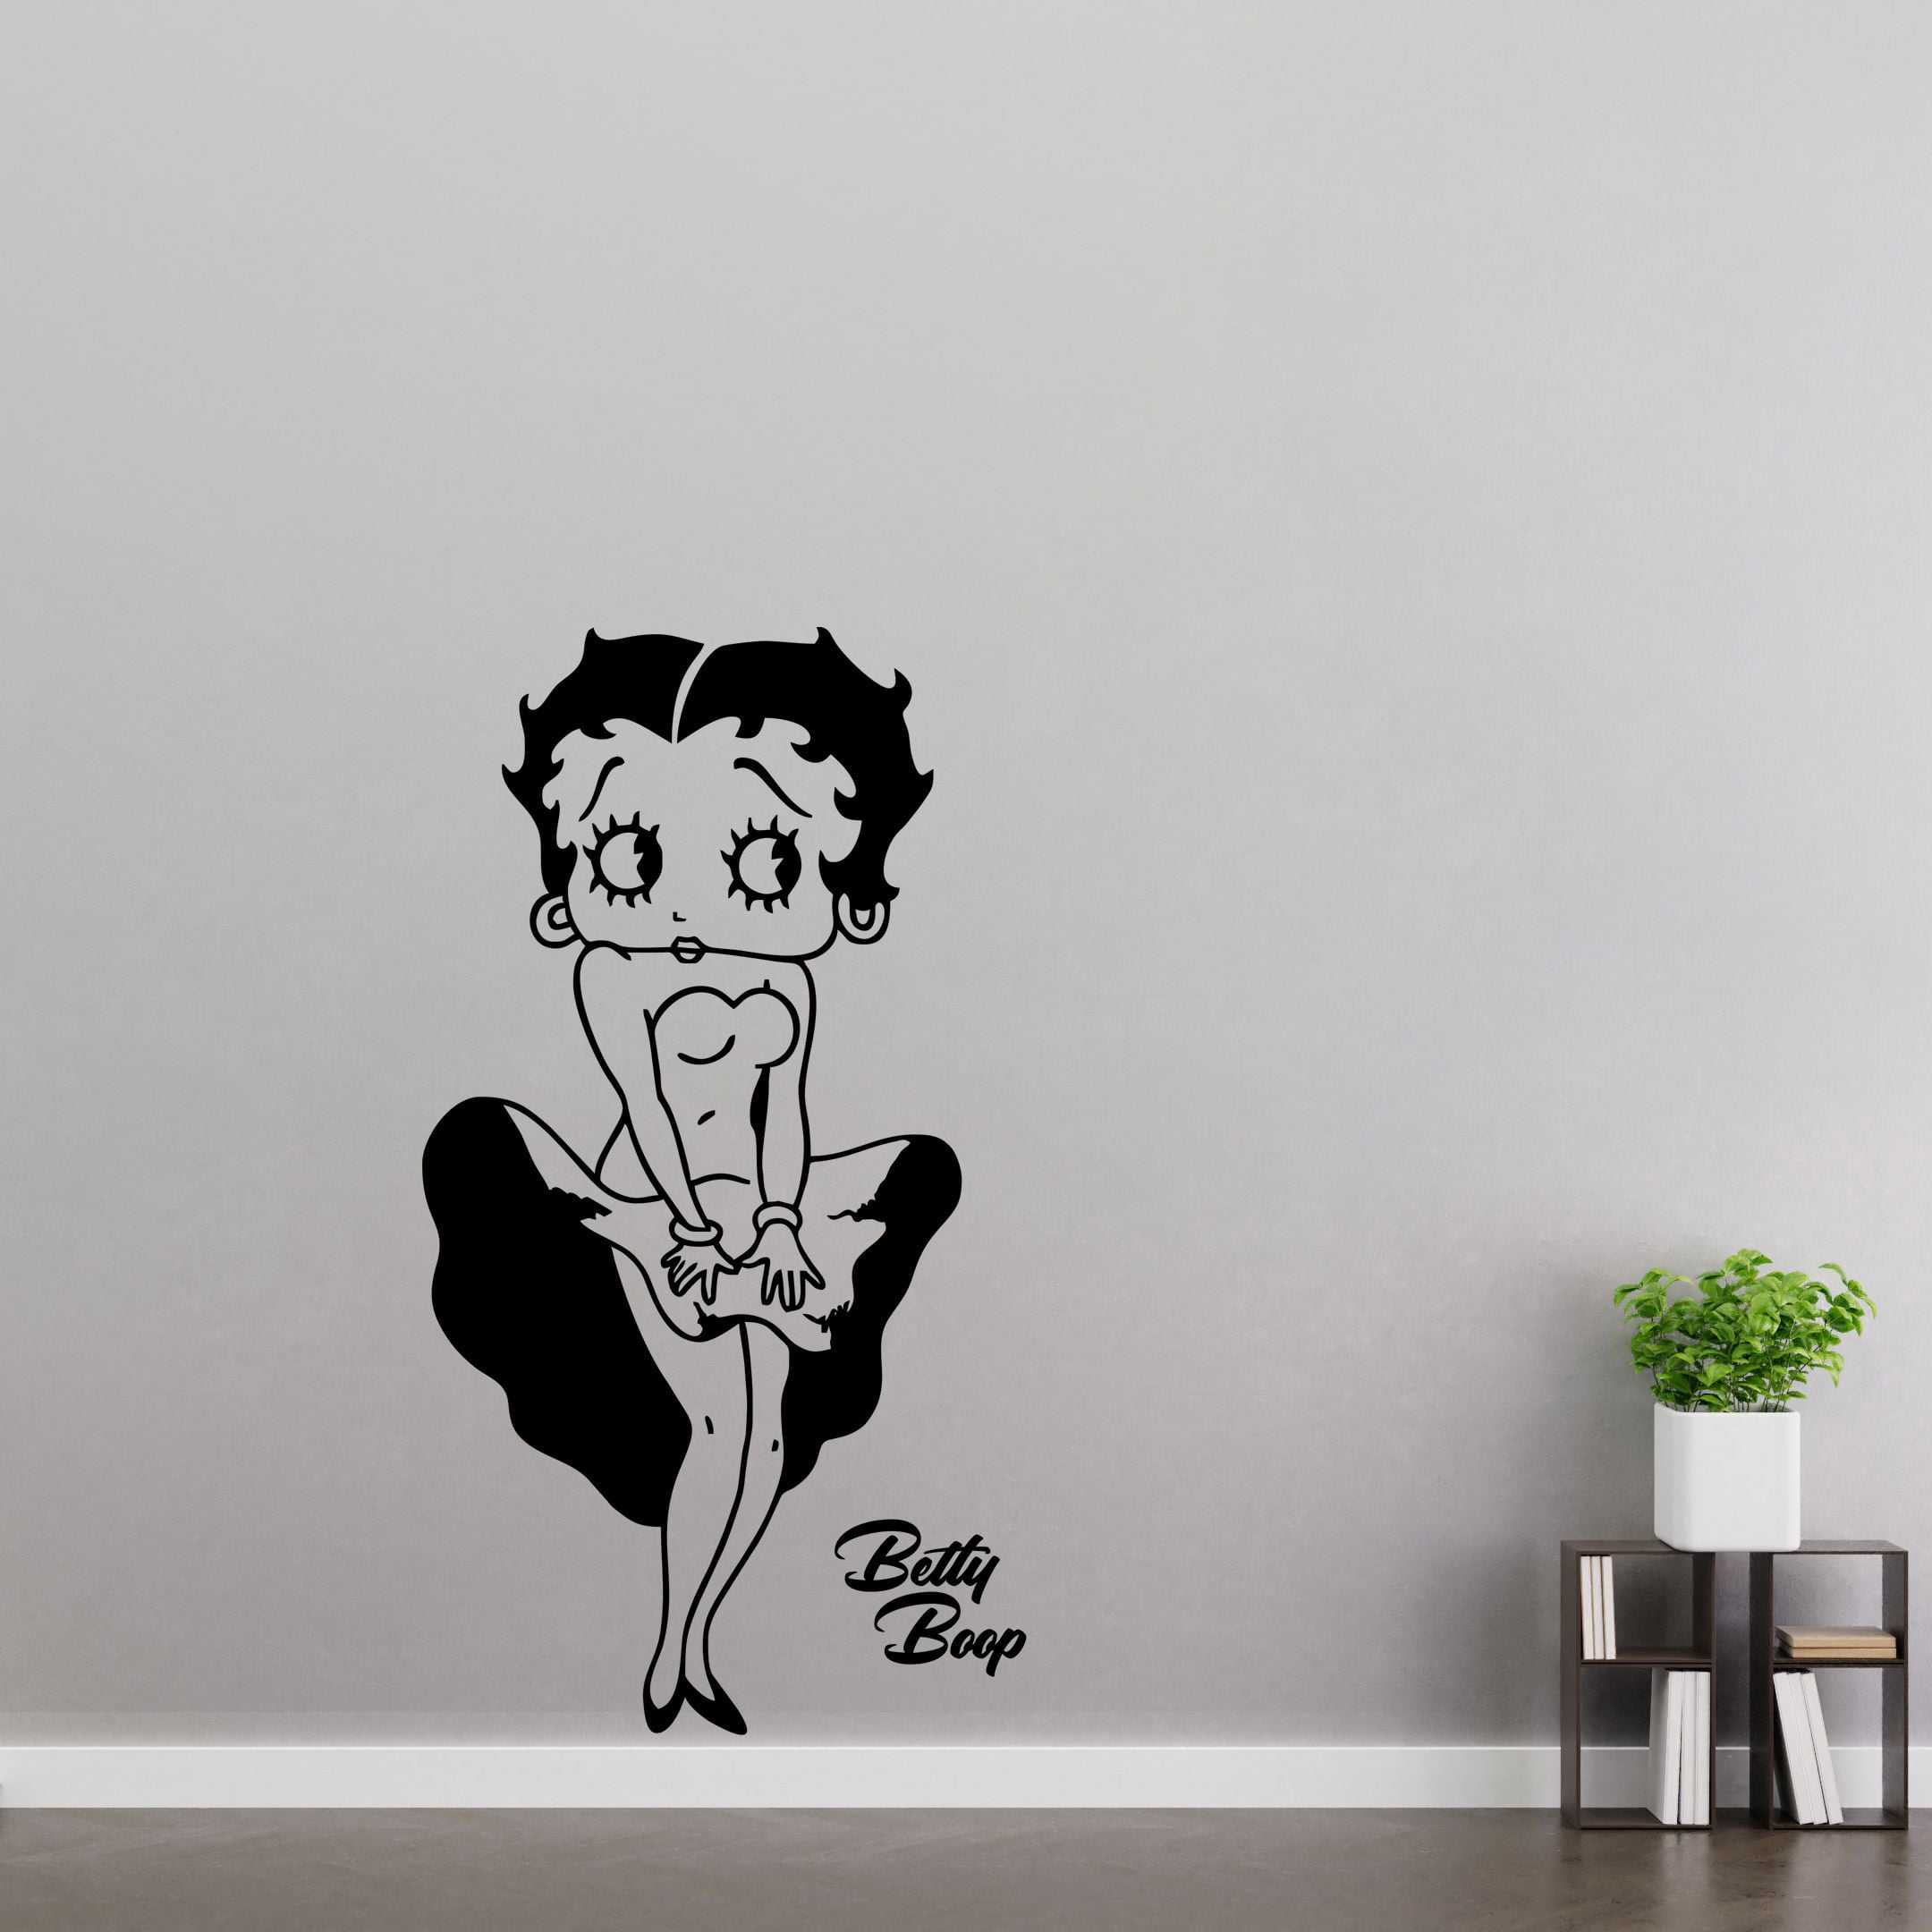 Icon Cartoon Character Betty Boop On Marilyn Monroe Famous Pose Wall Art  Decal - 14 x 20 Removable Kids Girls Bedroom Living Room Decor Art Design  Vinyl Adhesive Home Decoration Sticker 